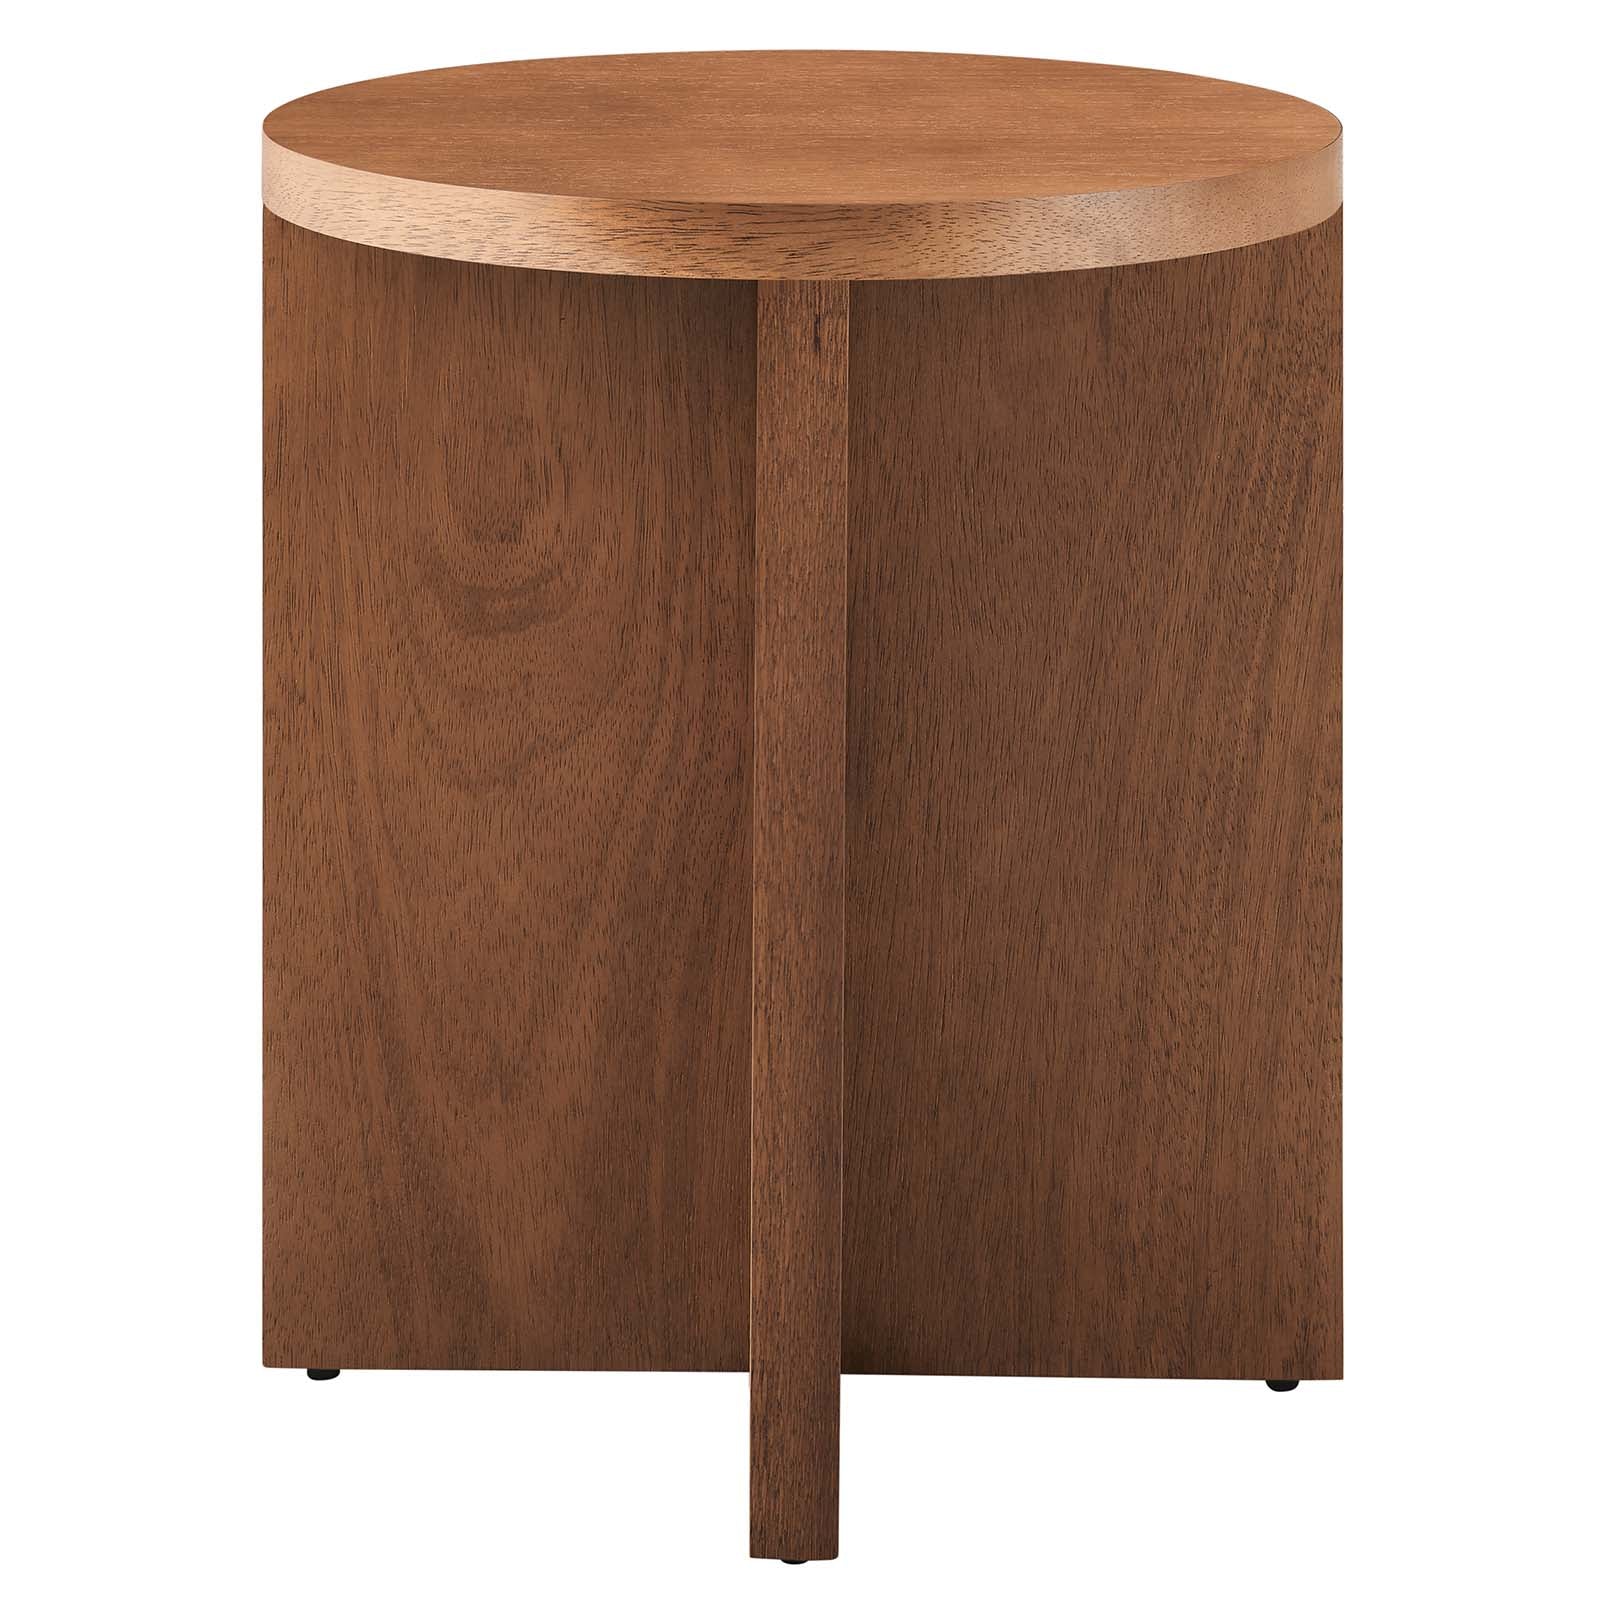 Silas Round Wood Side Table - East Shore Modern Home Furnishings